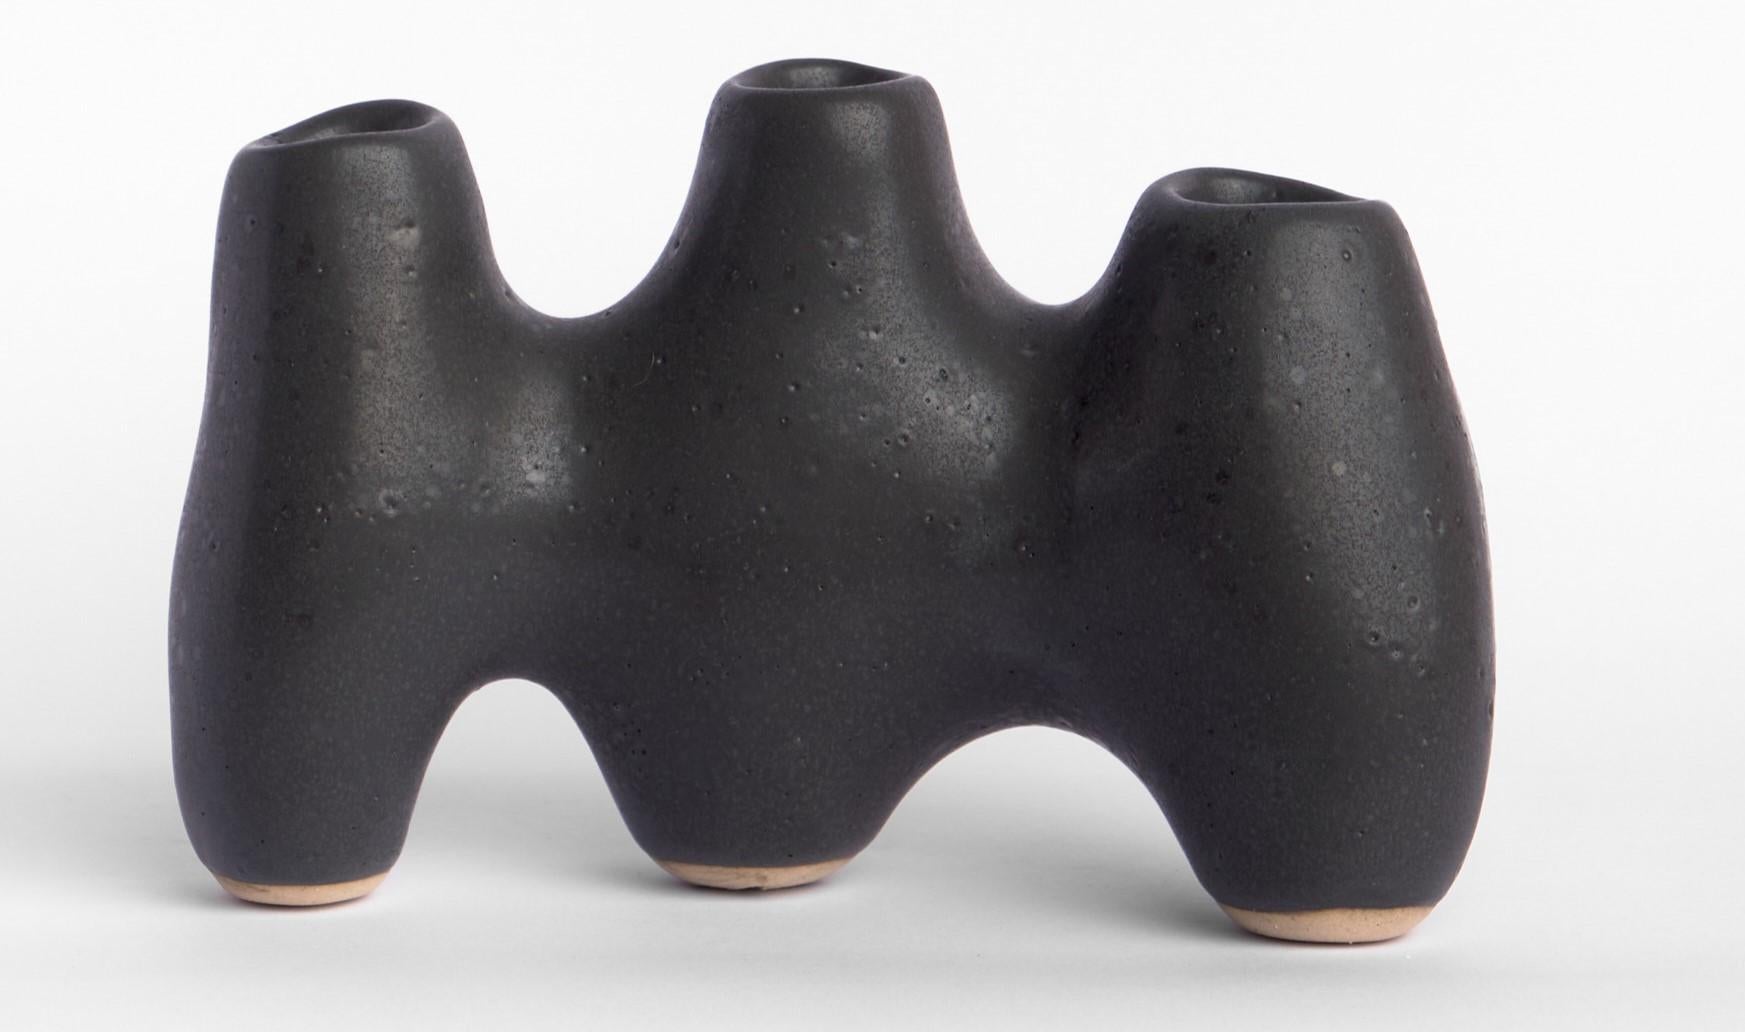 Mitosis candle holder by Camila Apaez
One of a Kind
Materials: Stoneware
Dimensions: W 10 x D 7 x 7 H cm

Ila Ceramica emerged from a process of inner inquiry where ceramics became a space for presence, silence, touch and patience. Camila